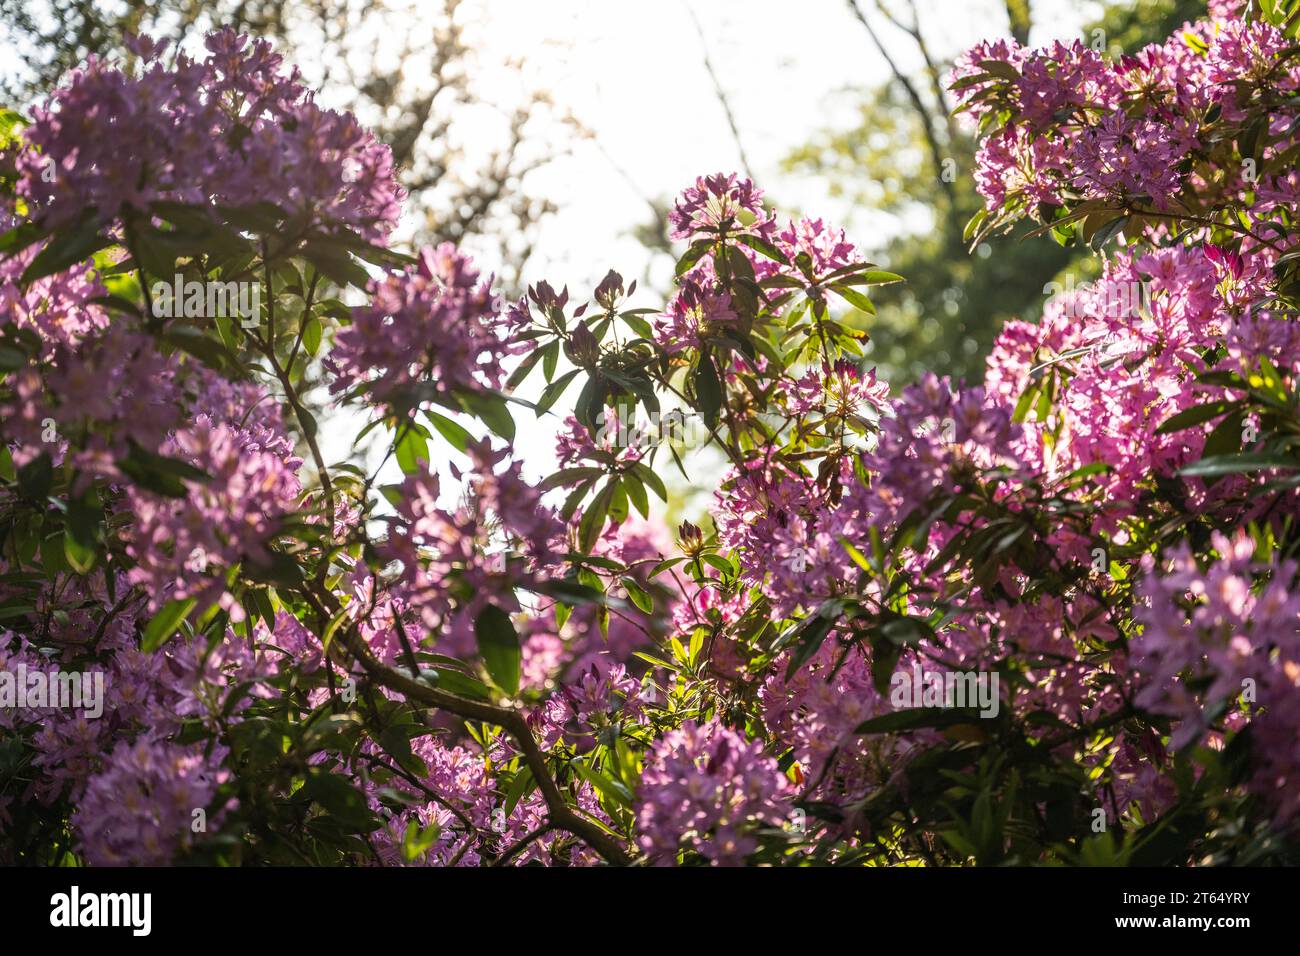 Rhododendron flowers (Rhododendron Homer), Royal Botanic Gardens, Kew, London, England, Great Britain Stock Photo